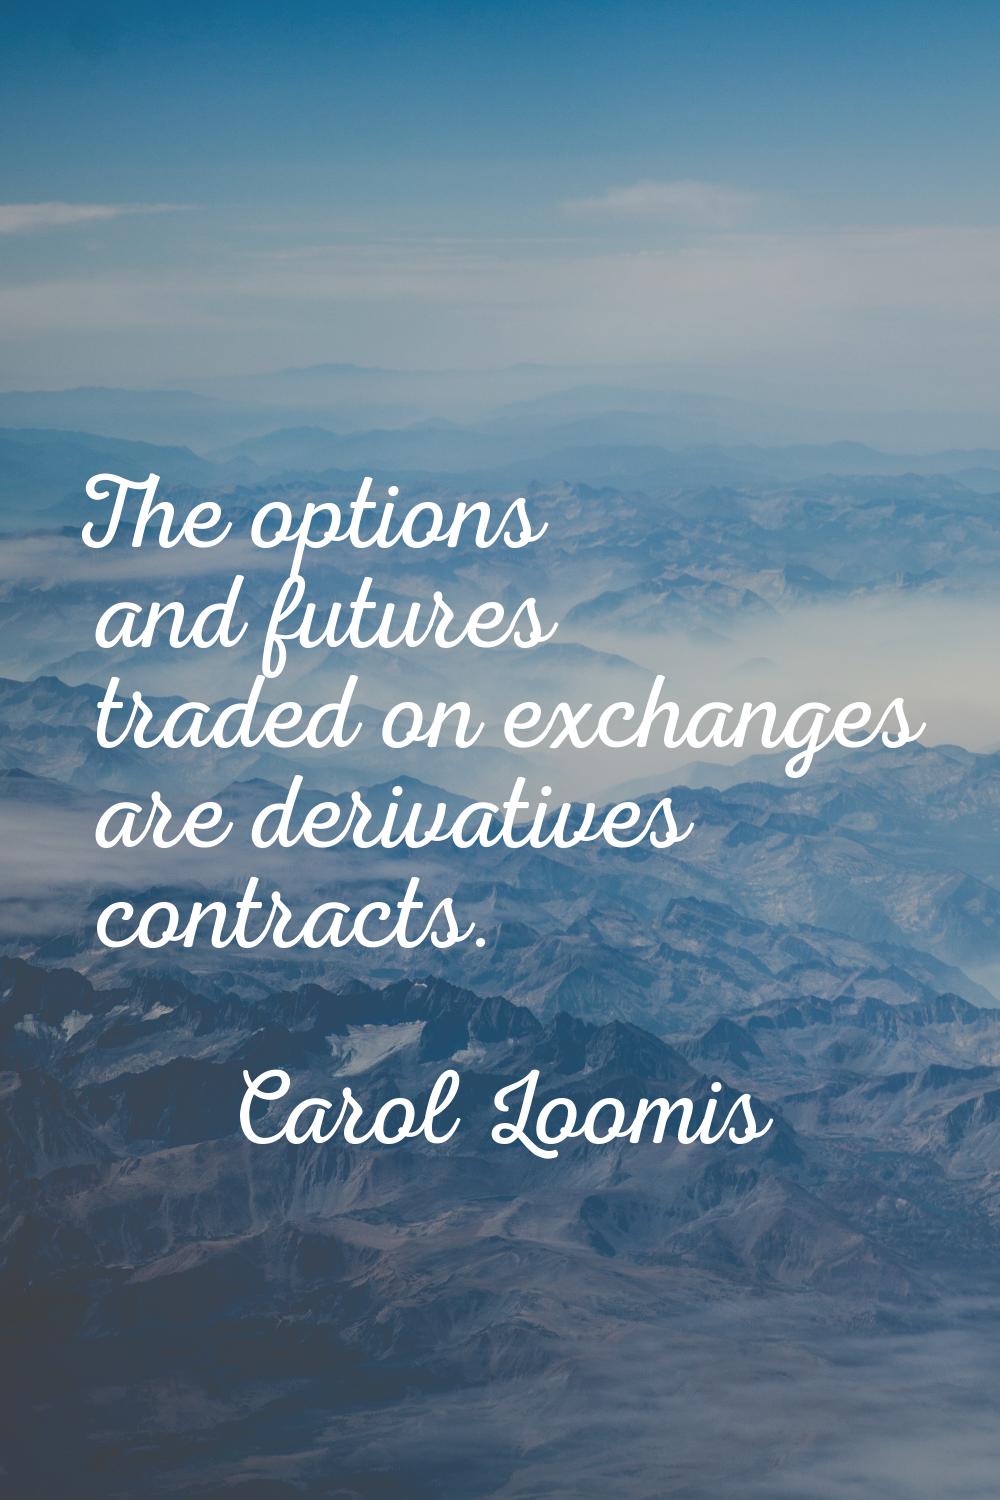 The options and futures traded on exchanges are derivatives contracts.